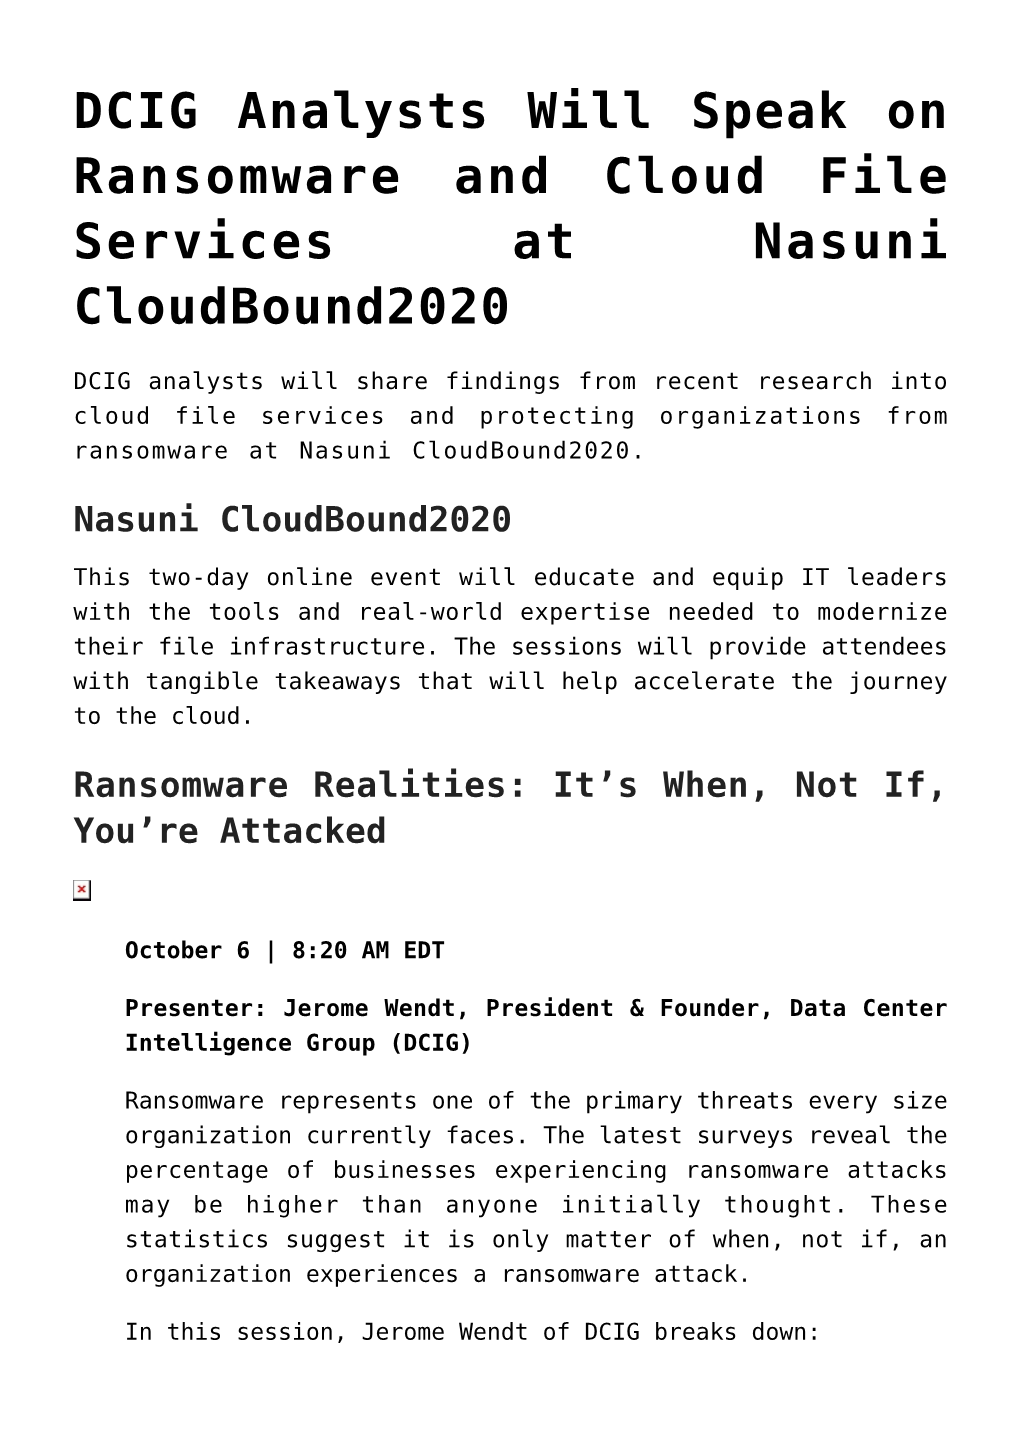 DCIG Analysts Will Speak on Ransomware and Cloud File Services at Nasuni Cloudbound2020